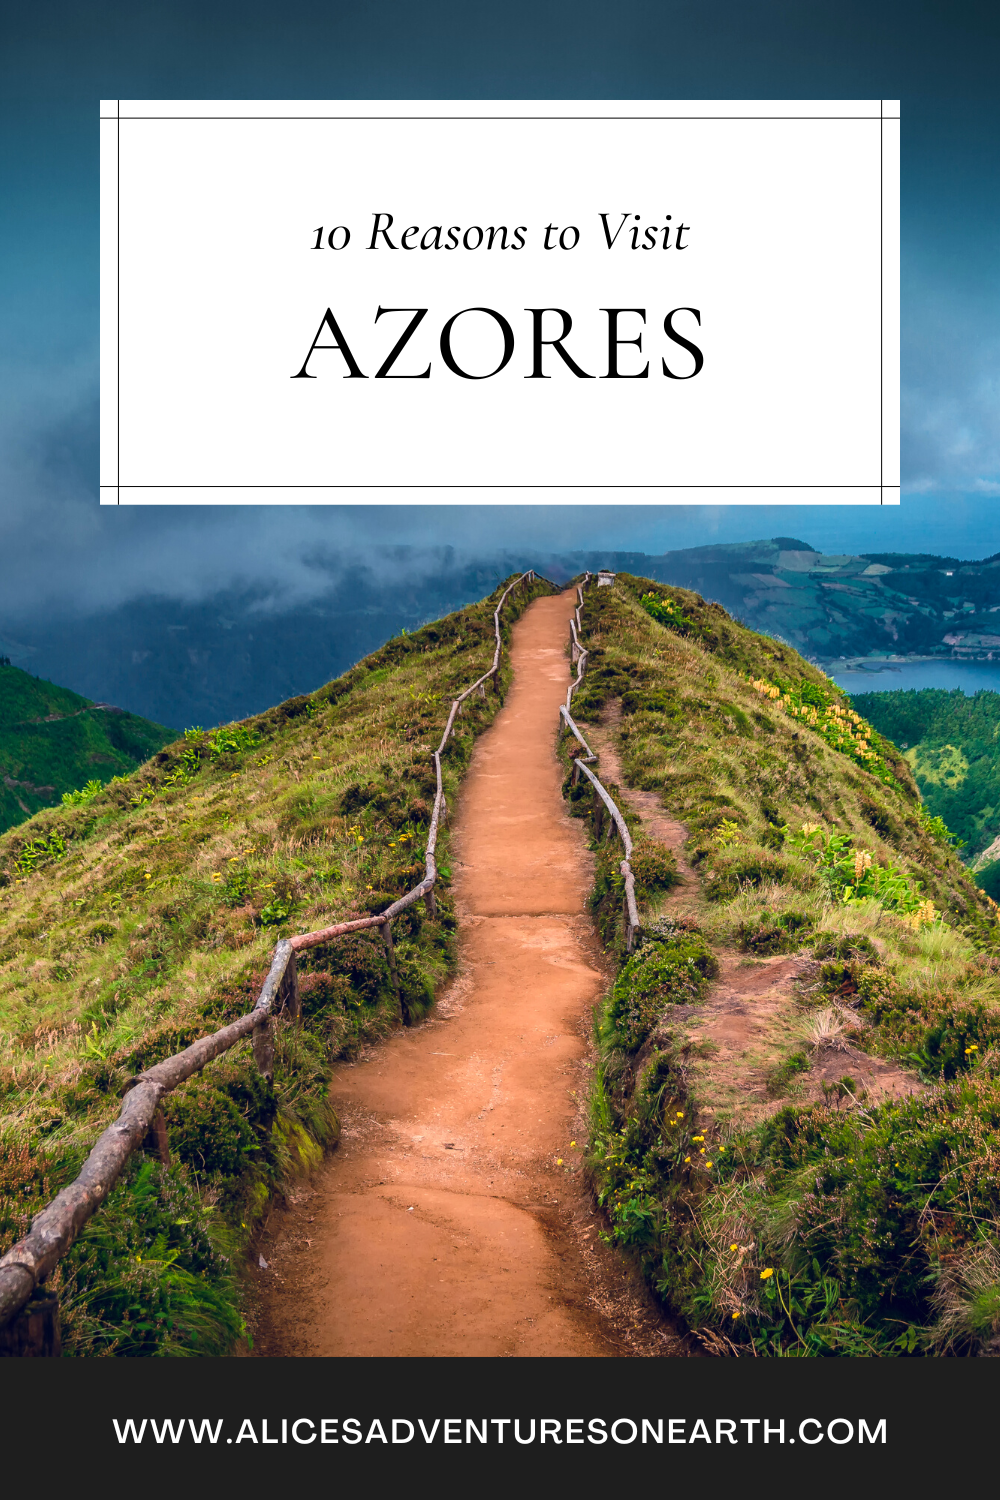 10 reasons to Visit the Azores. An island chain with 9 islands, great for hiking, whale watching, hot springs and volcanoes. With miles of stunning coastline and people few and far between. #portugal #azores 